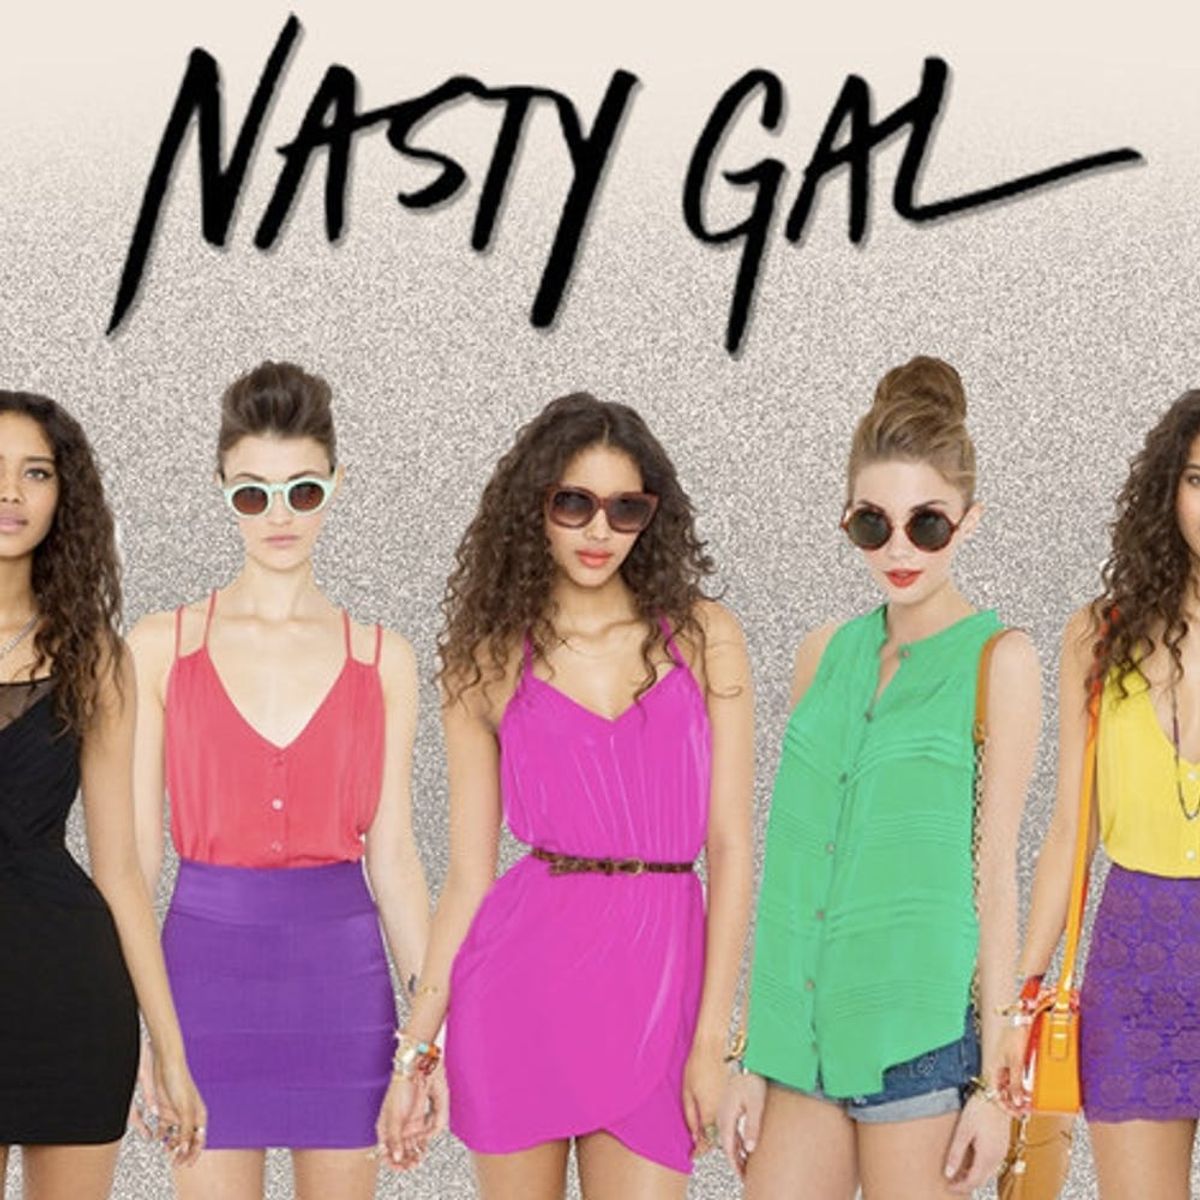 Here’s What Nasty Gal’s Bankruptcy Means for Your Fave Online Brand